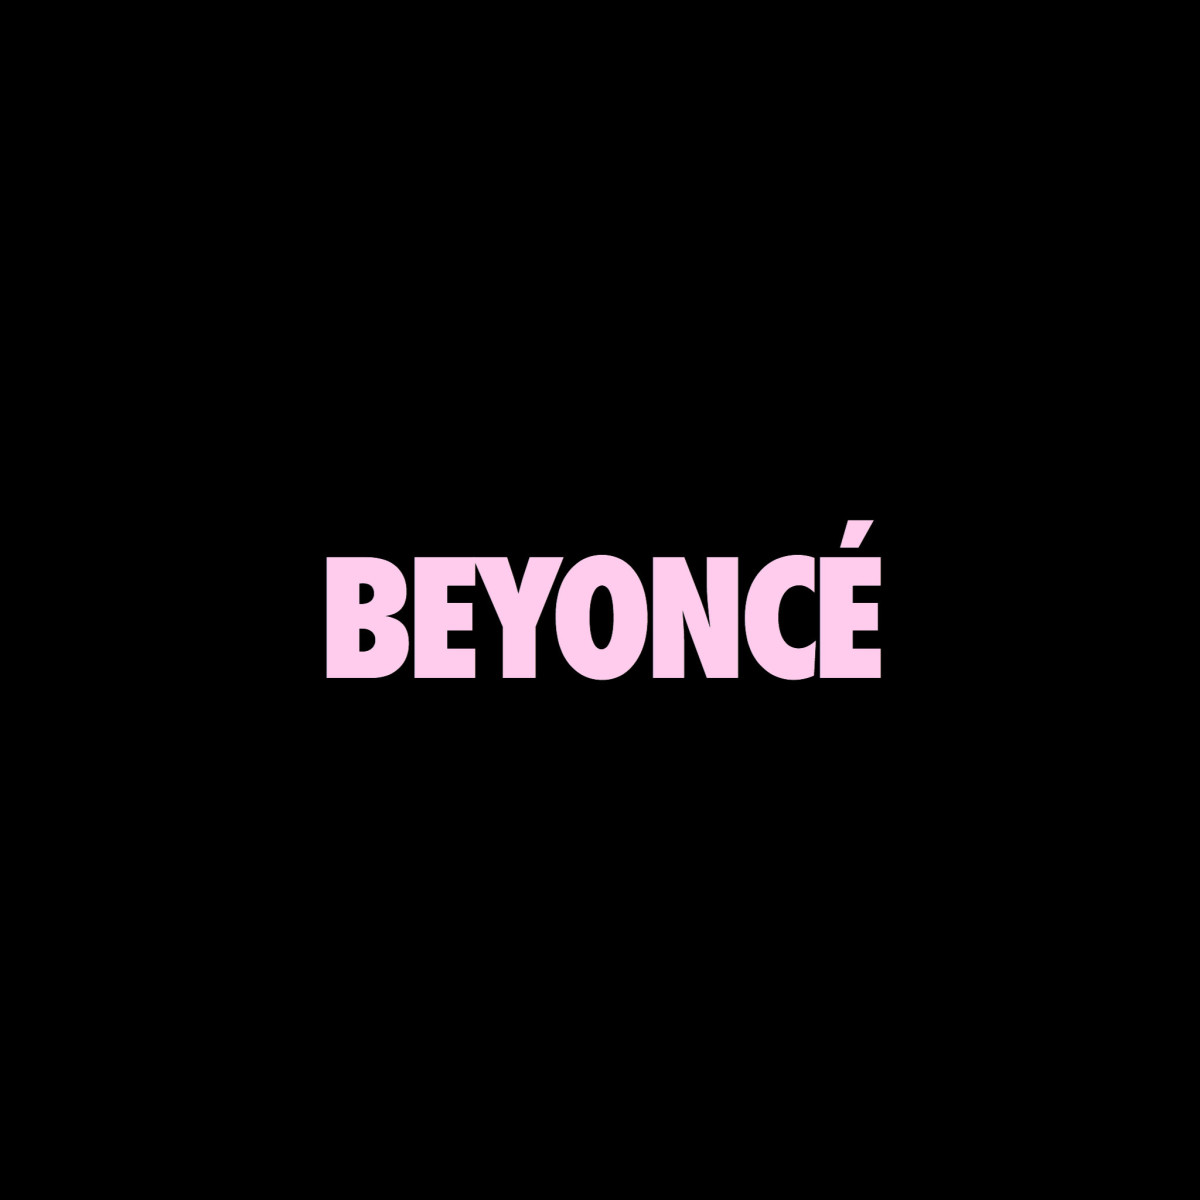 What Beyoncé’s Self-Titled Album Taught Me About Music - Spinditty